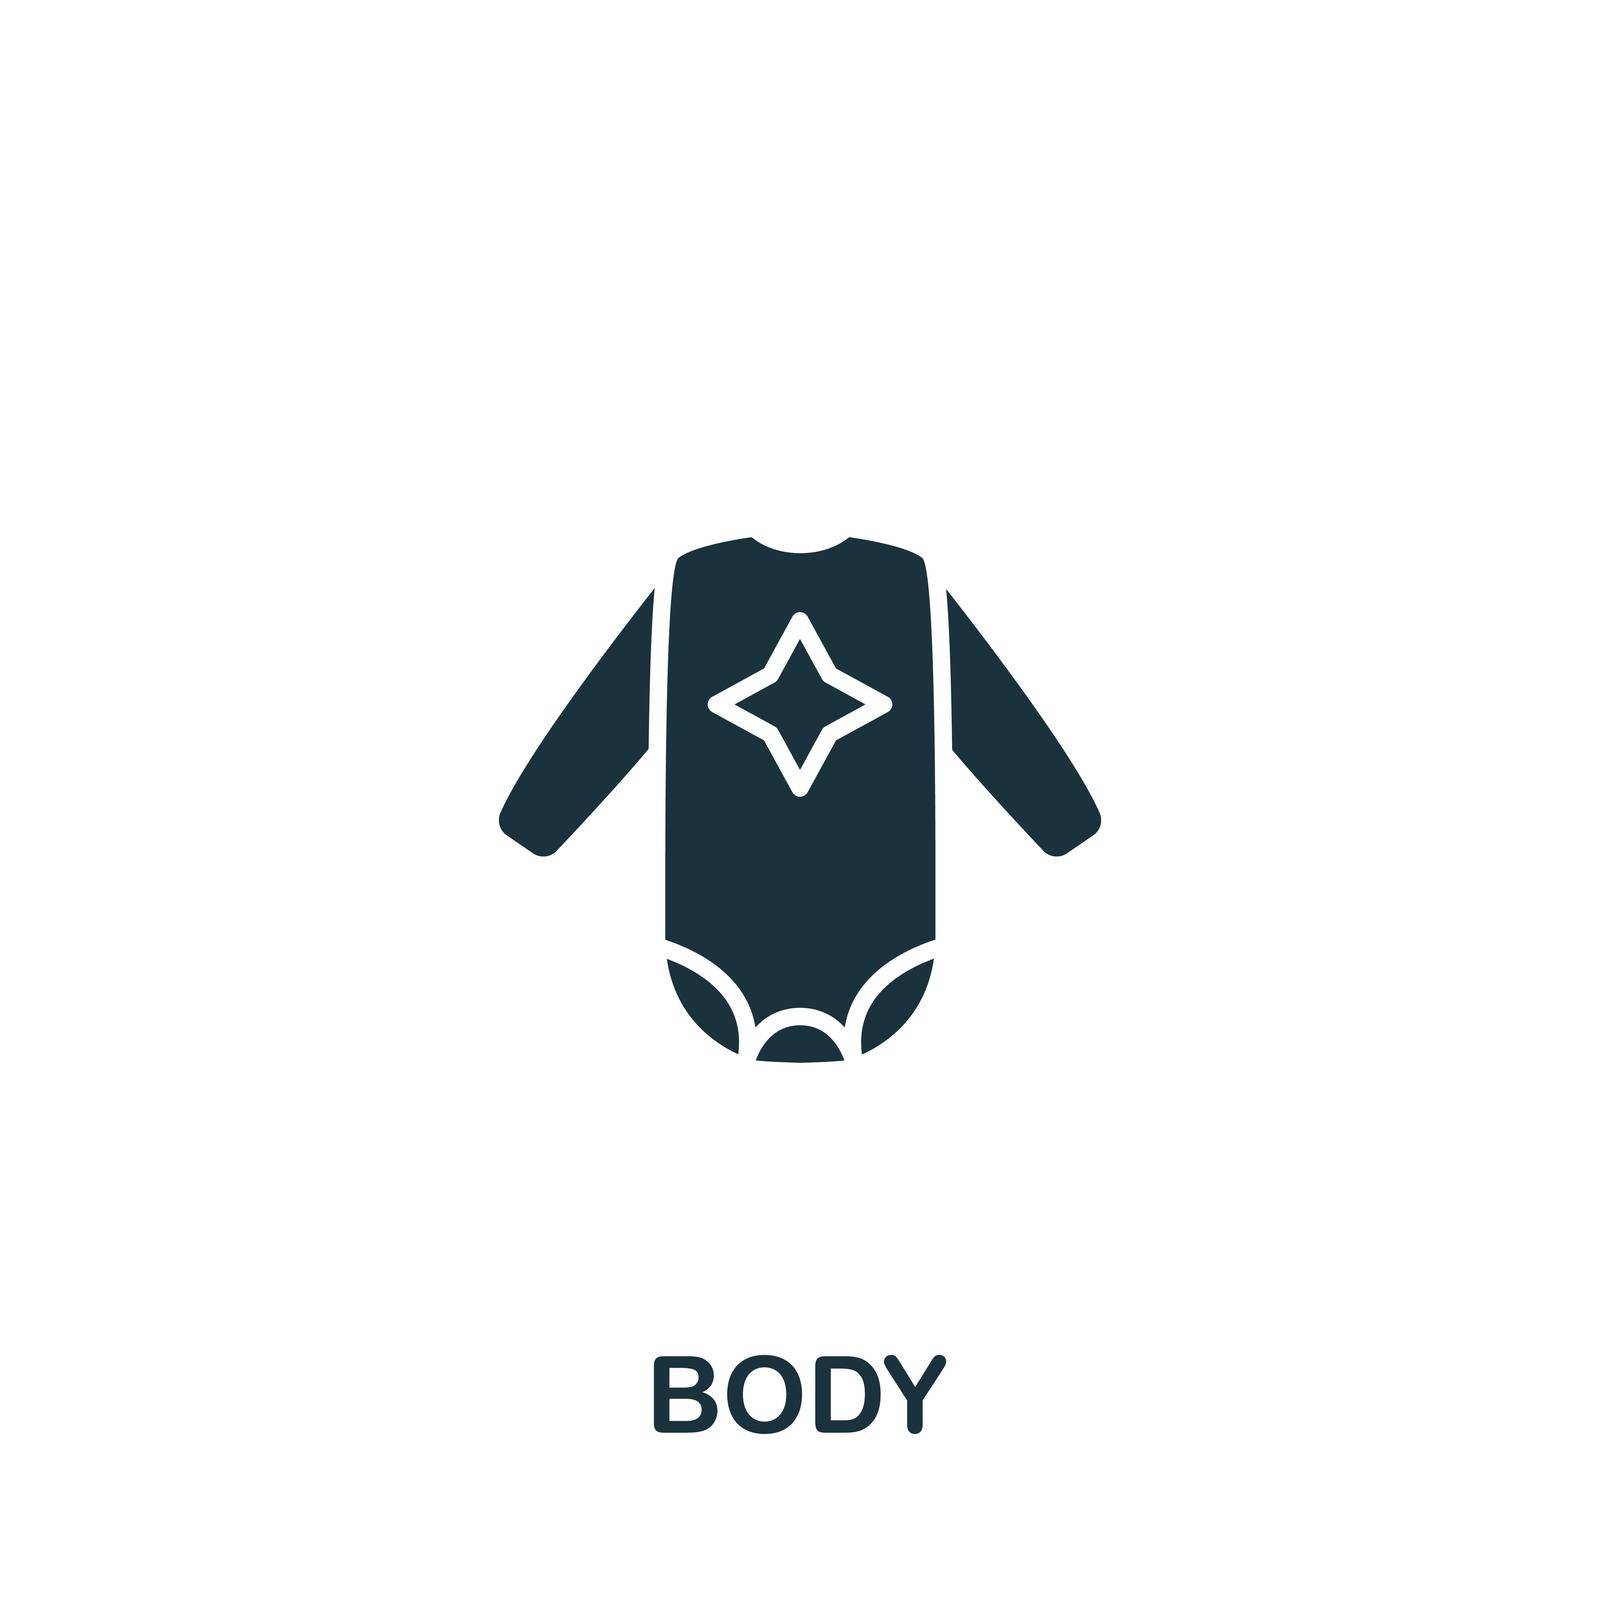 Body icon. Simple line element body symbol for templates, web design and infographics.